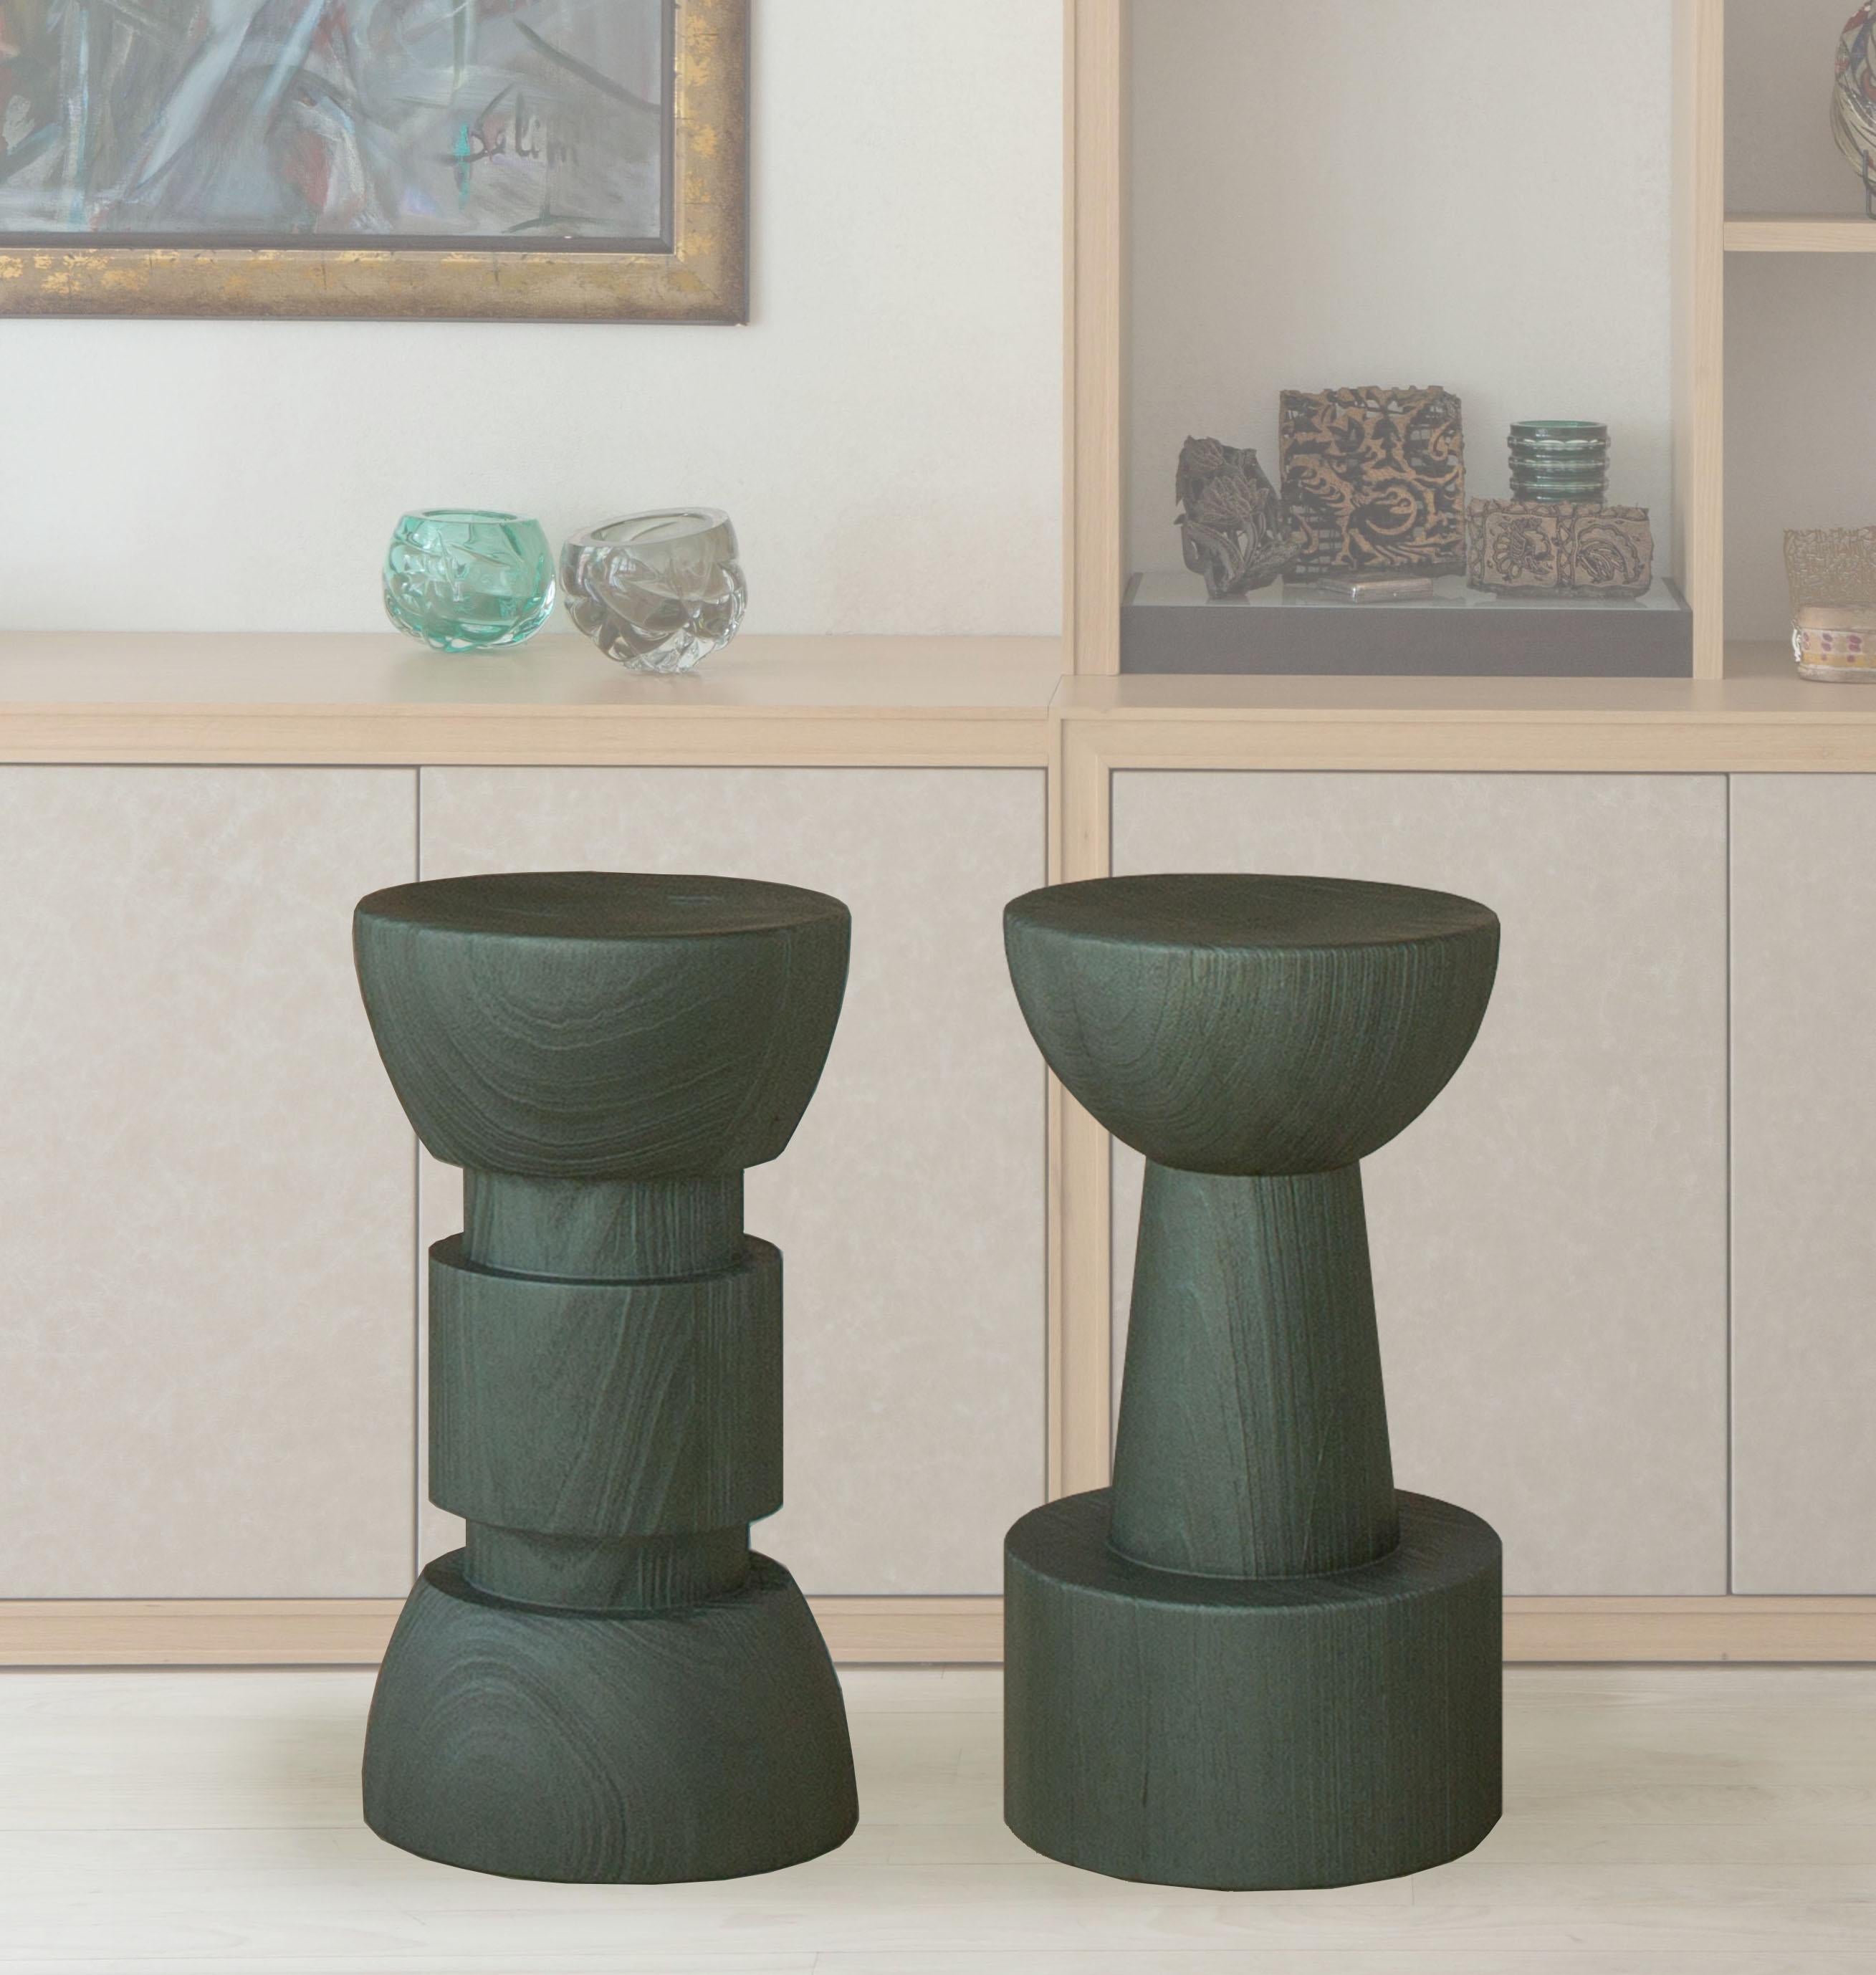 Sculptural Wood stools, inspired by African Totem Sculptures. Can be made for indoor or outdoor use, in a variety of paint colors or natural finish.
Can be made in bar, island or display pillar height.